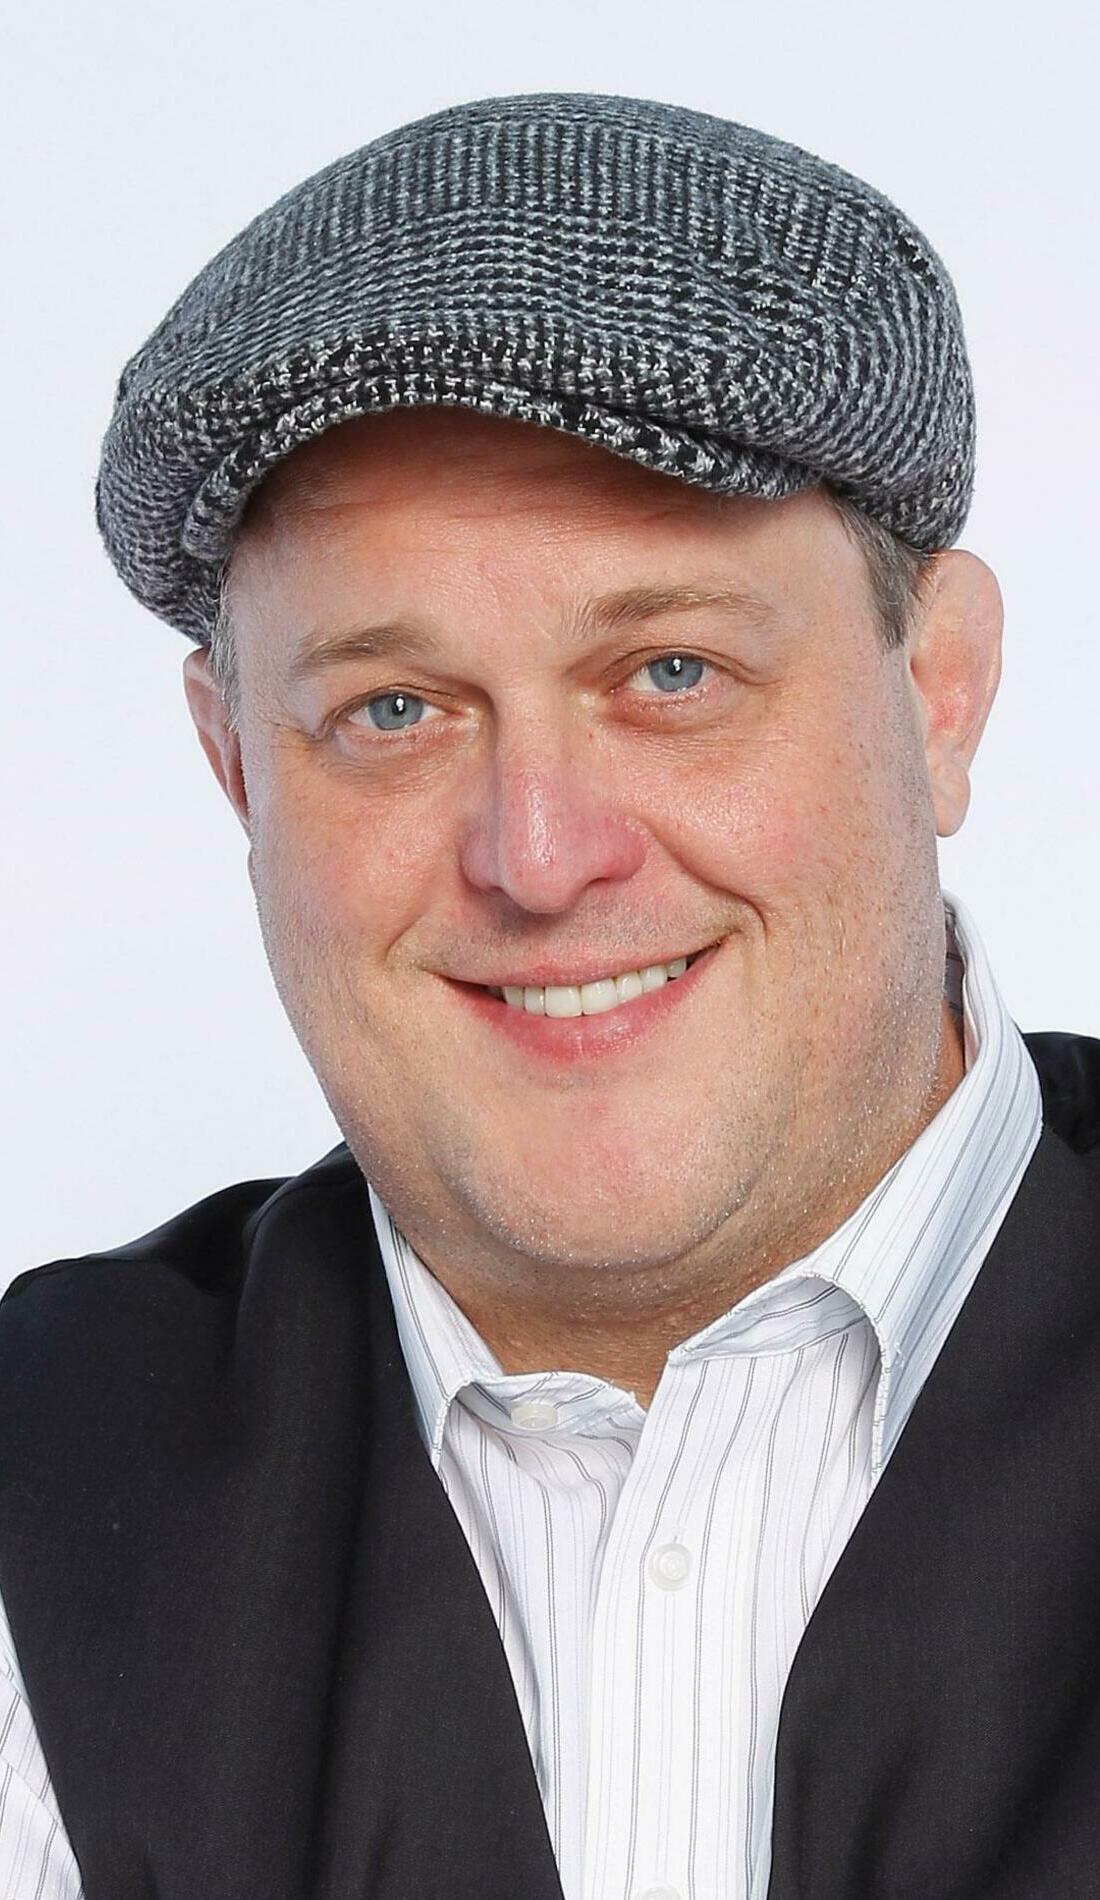 A Billy Gardell live event